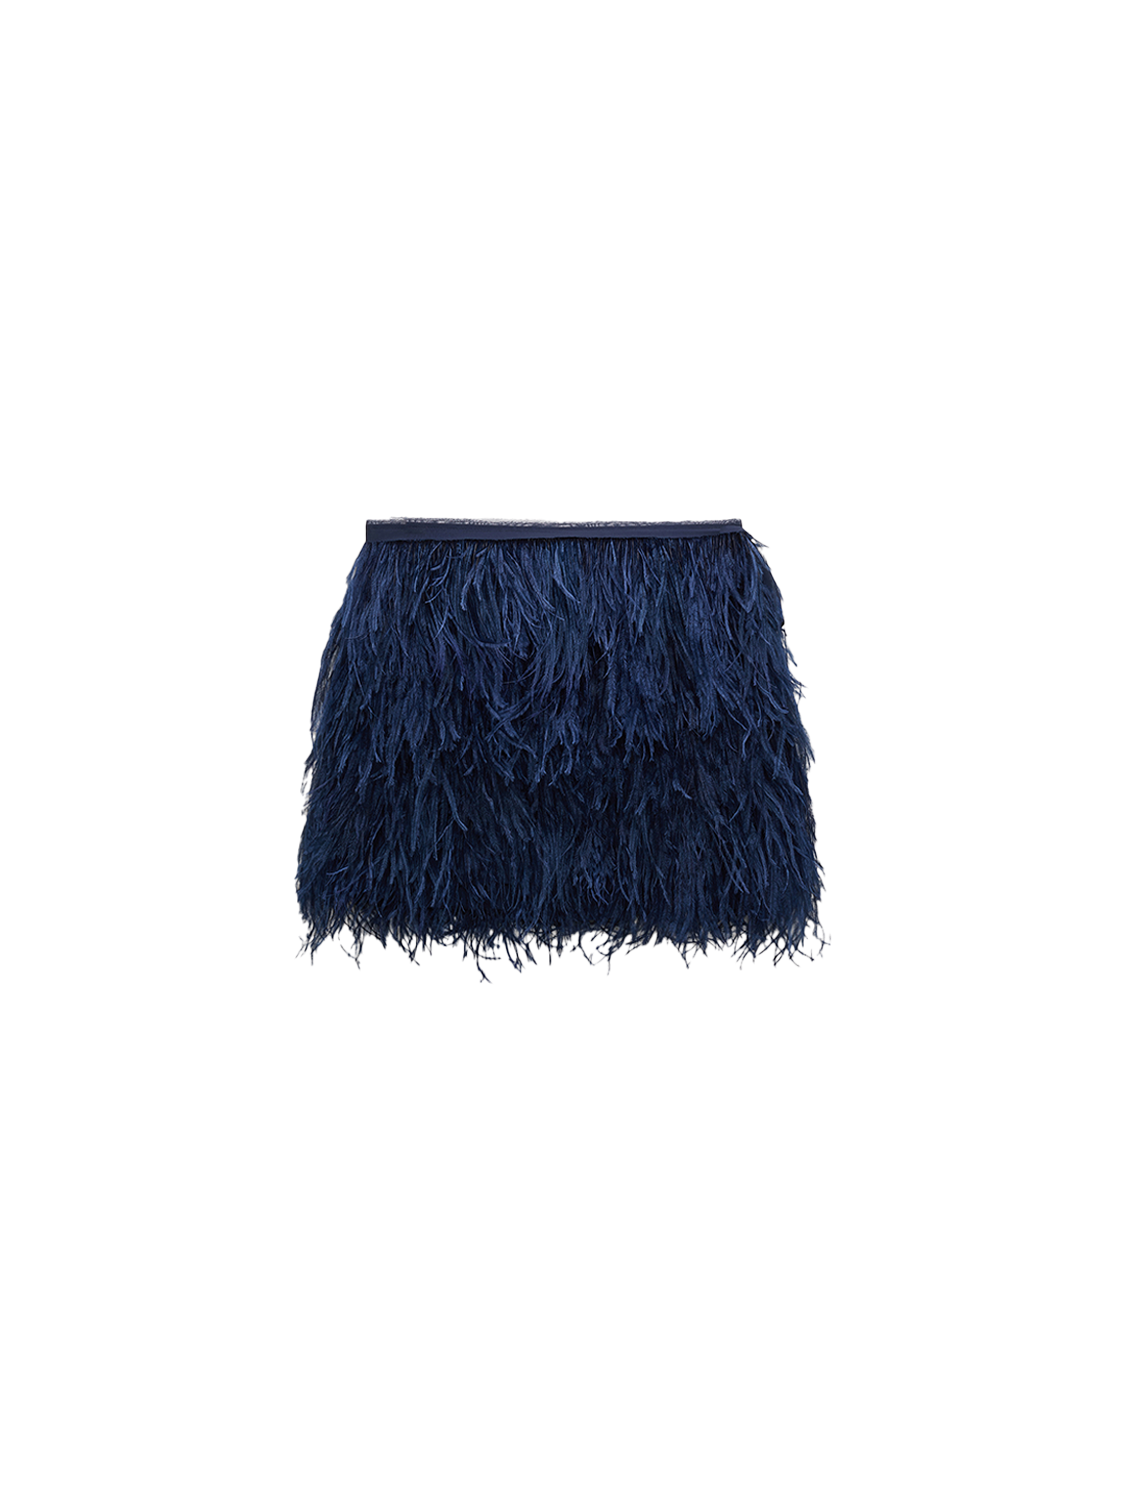 Feathery Volume - Mikni skirt with feathers 